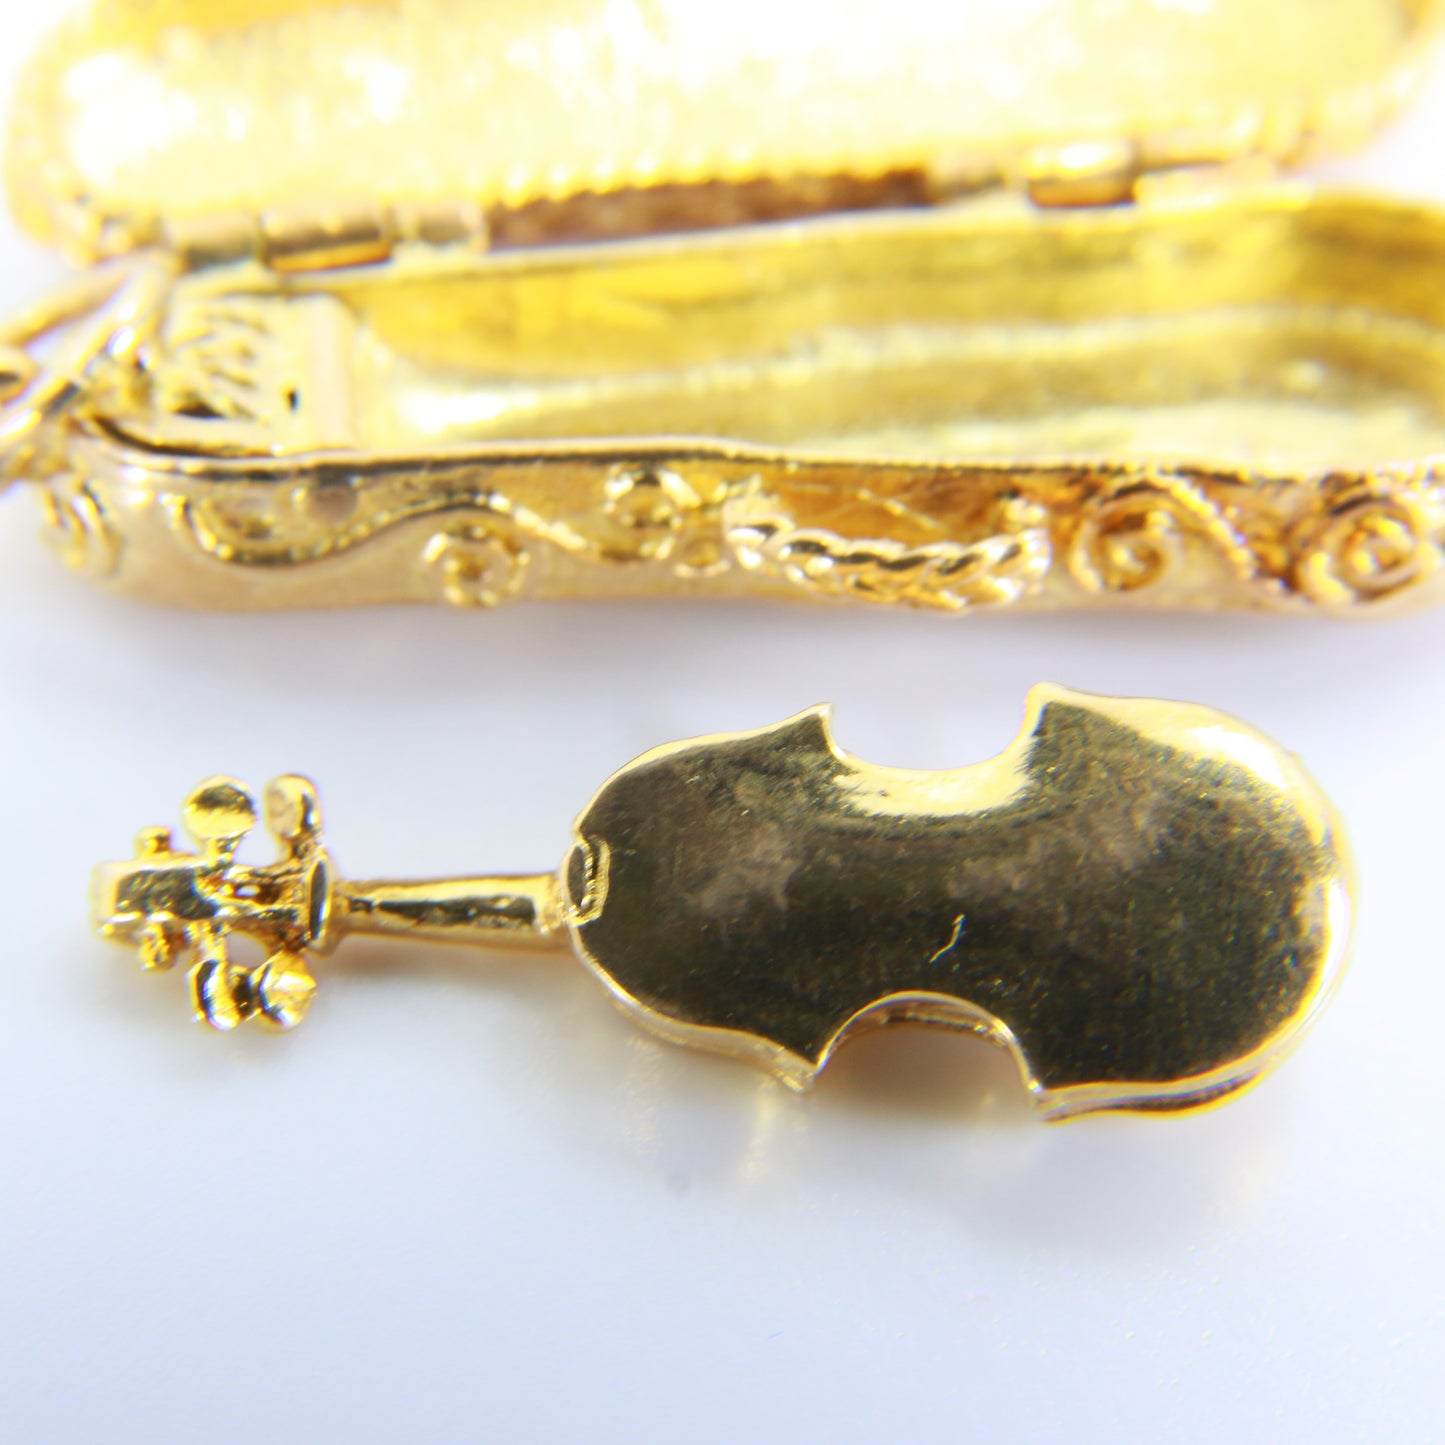 Vintage 9ct Violin in Case Opening Pendant Charm Detailed Gold Pendant